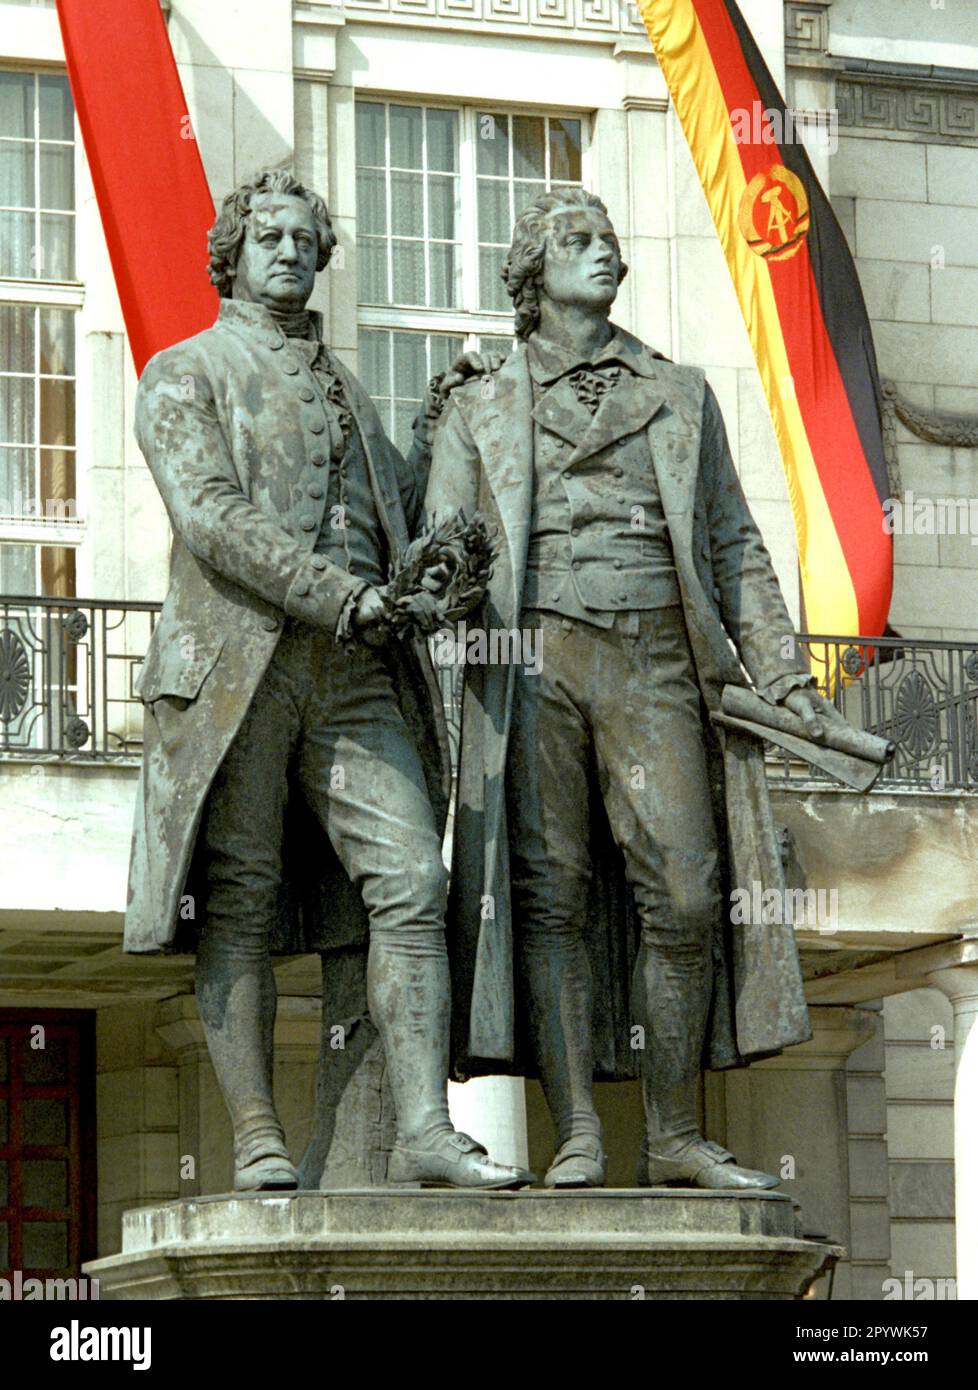 Thuringia / GDR / 1988 Weimar, city German Classic. Monument Wolfgang Goethe and Friedrich Schiller in front of the National Theater. Behind red flag and GDR national flag // Bundeslaender *** Local Caption *** History / Fascism / Germany / Concentrationcamp Buchenwald near Weimar in Communist Germany.  The political strategy of the SPD Party: approach in small steps. The visit of 400 SPD members from West-Berlin was highly political in those days. [automated translation] Stock Photo